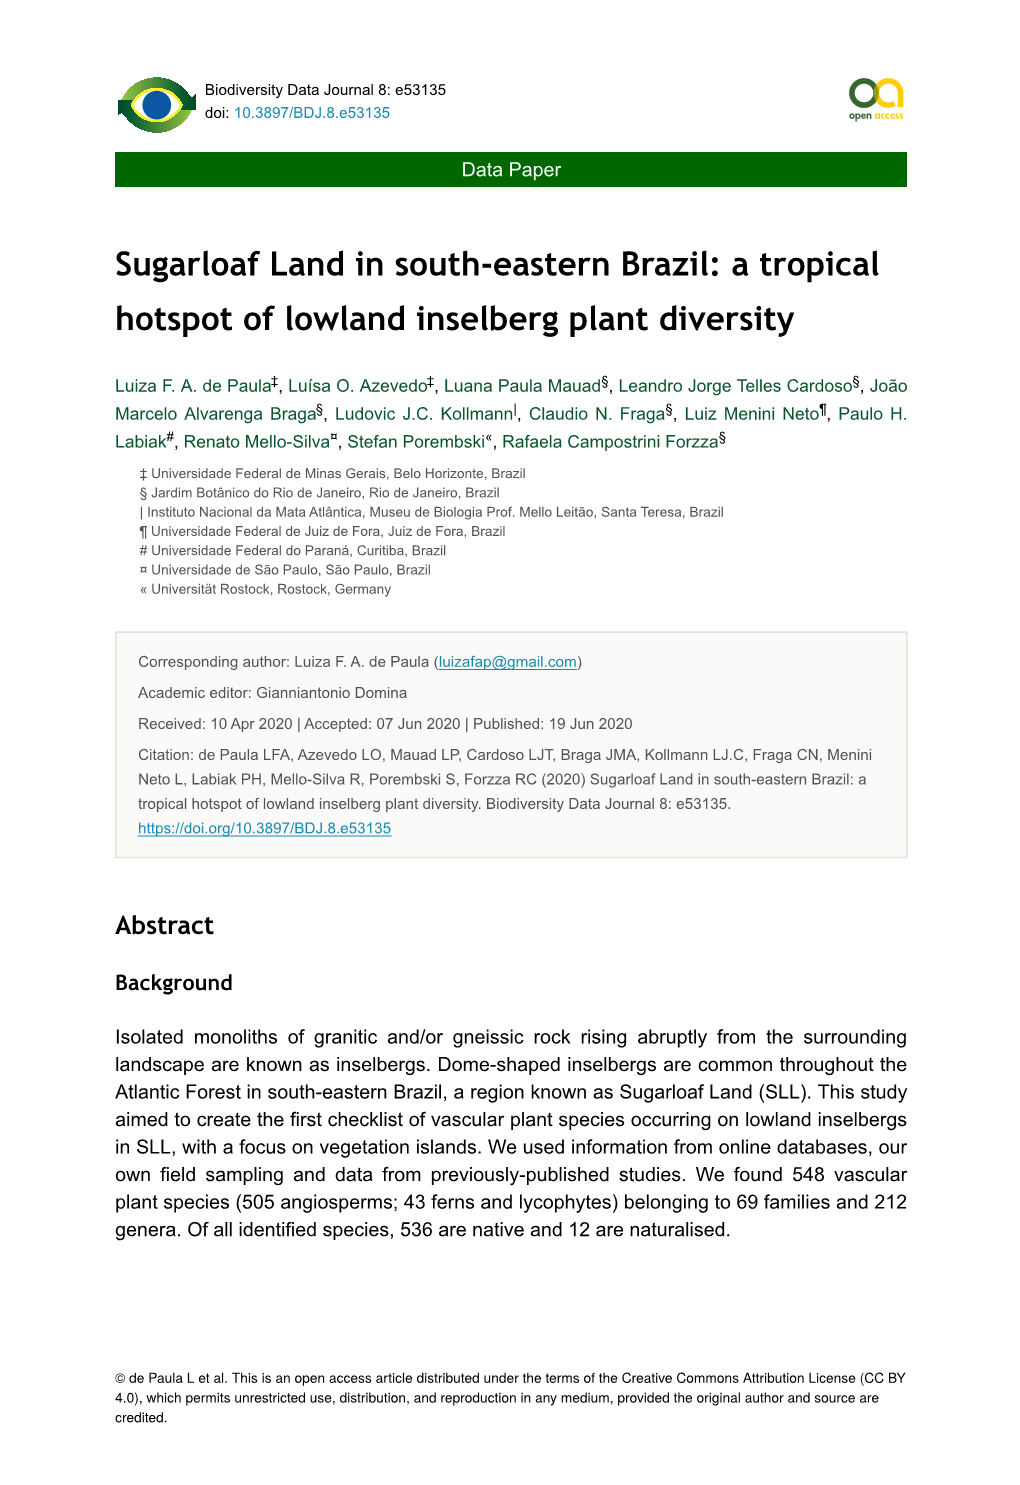 Sugarloaf Land in South-Eastern Brazil: a Tropical Hotspot of Lowland Inselberg Plant Diversity